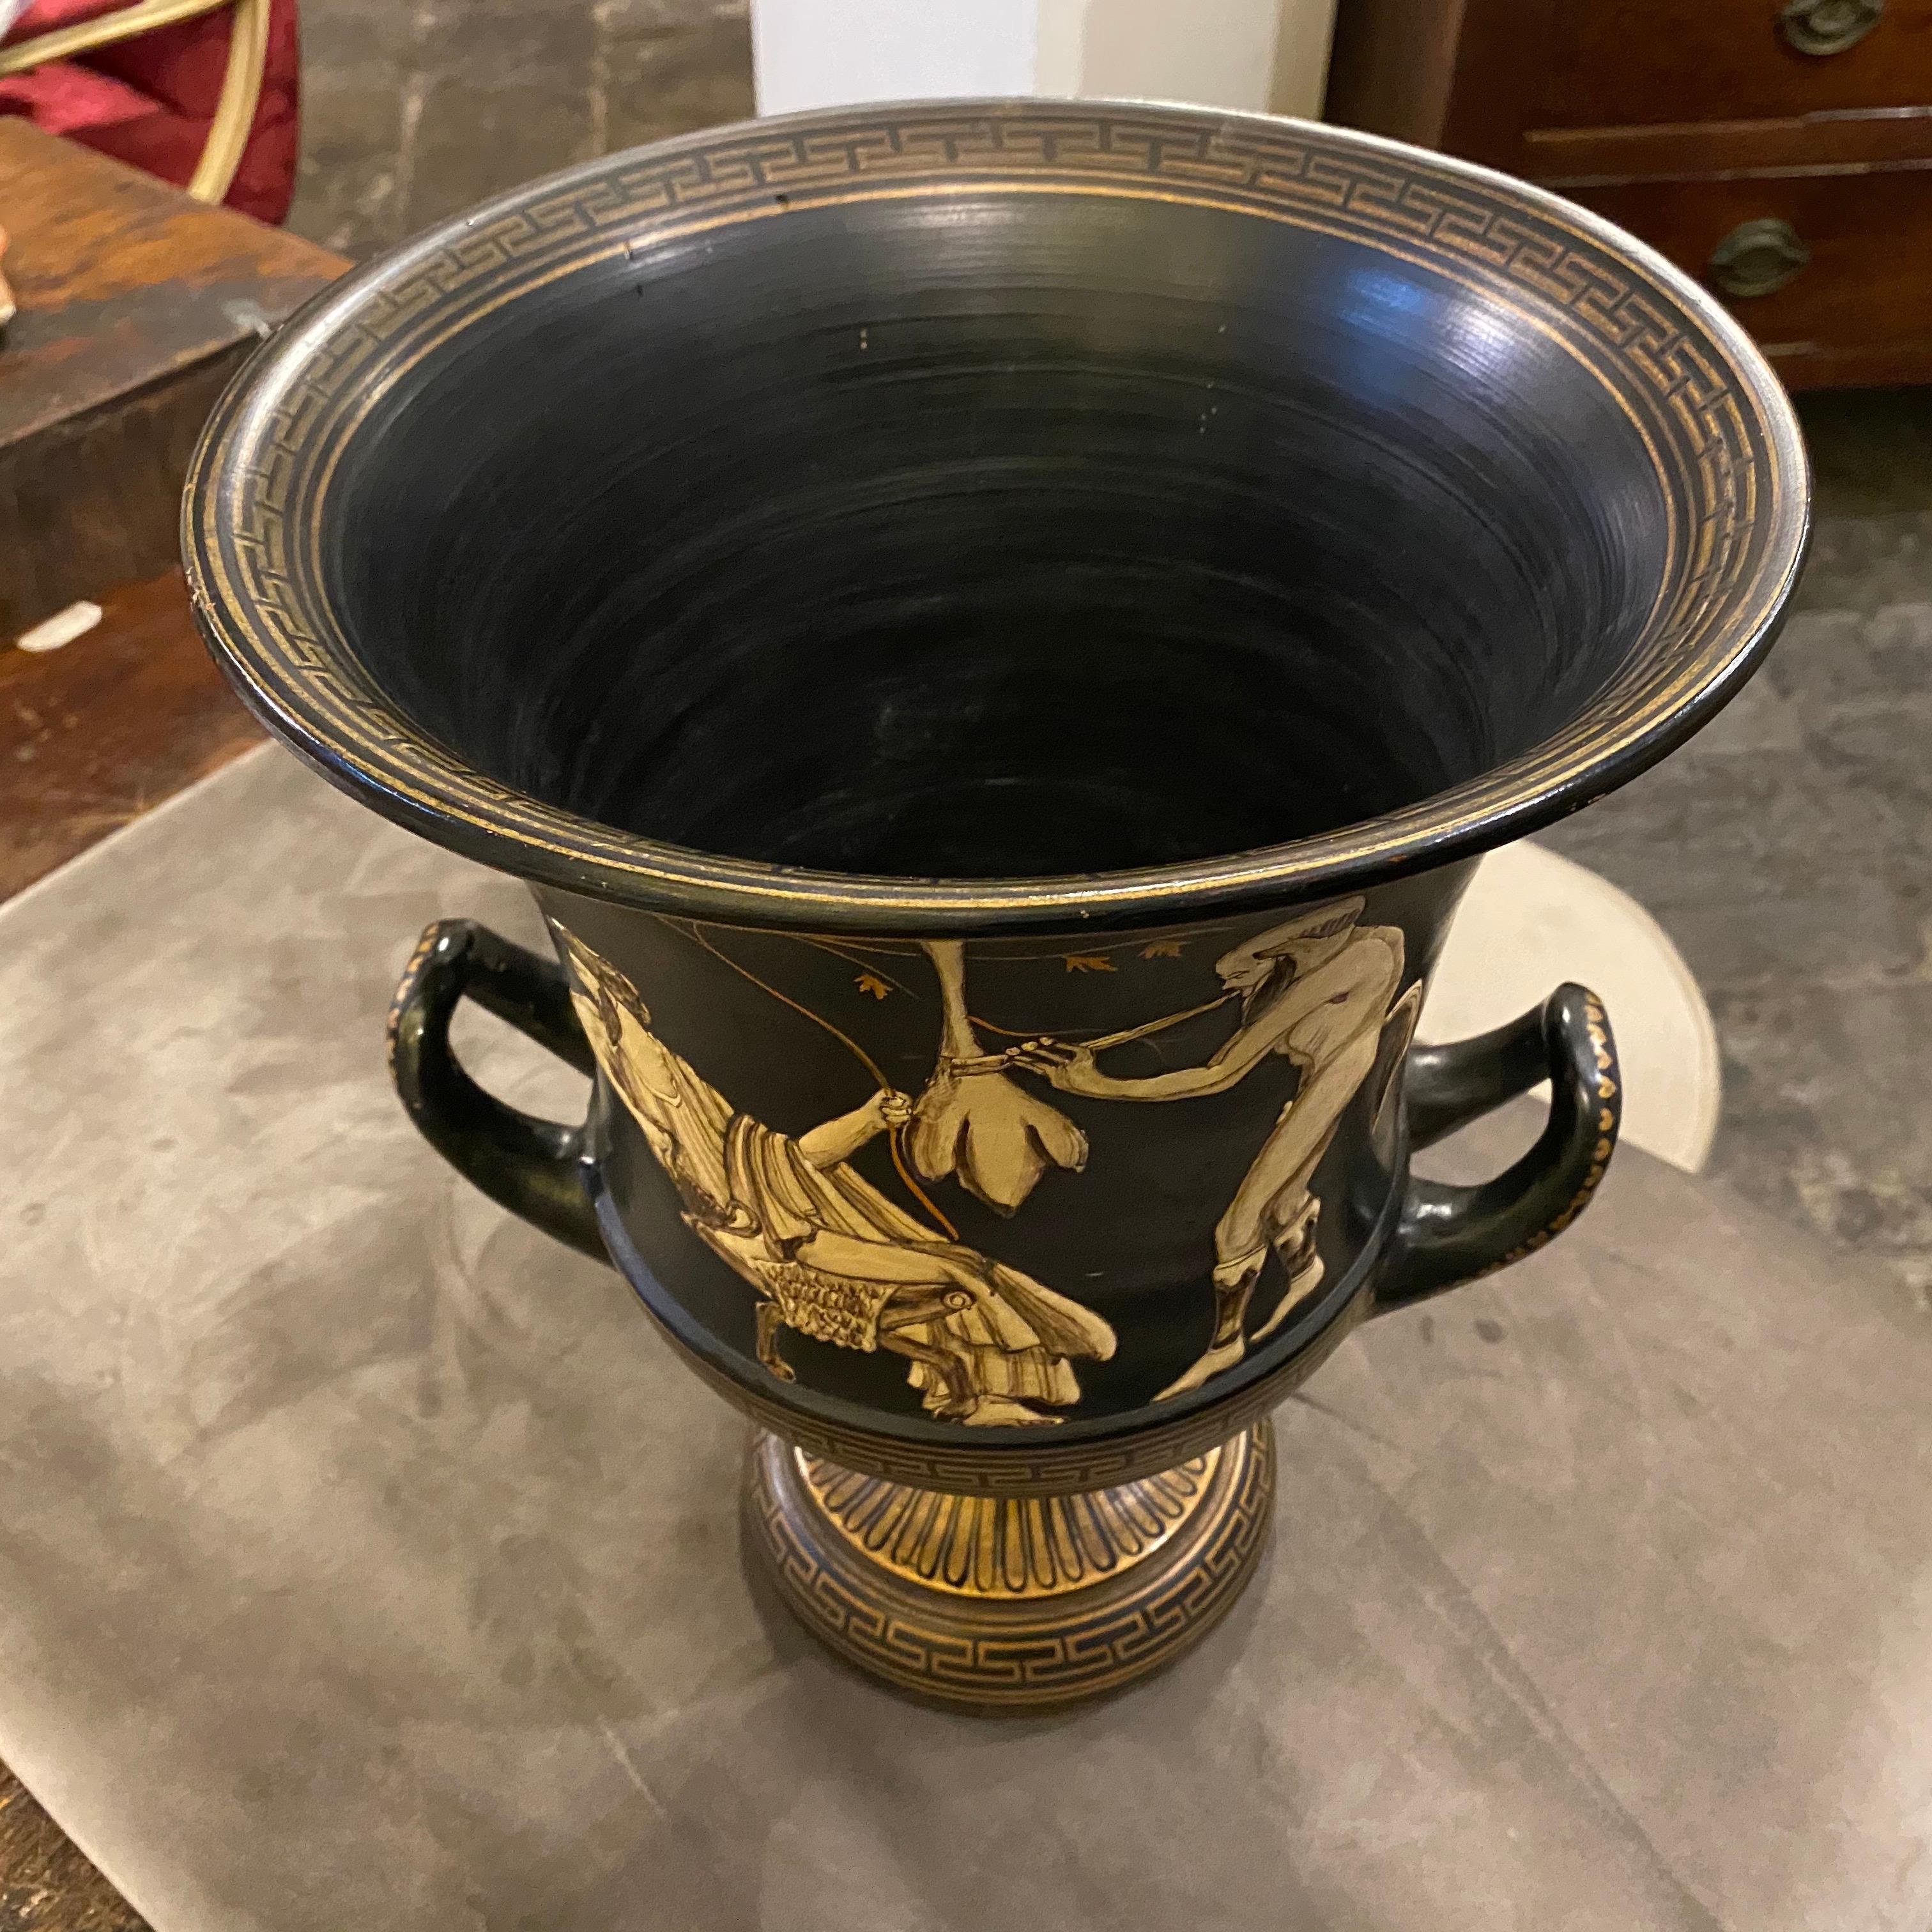 Hand-Painted 1950s Vintage Handcrafted Black and Gold Terracotta Greek Crater Vase